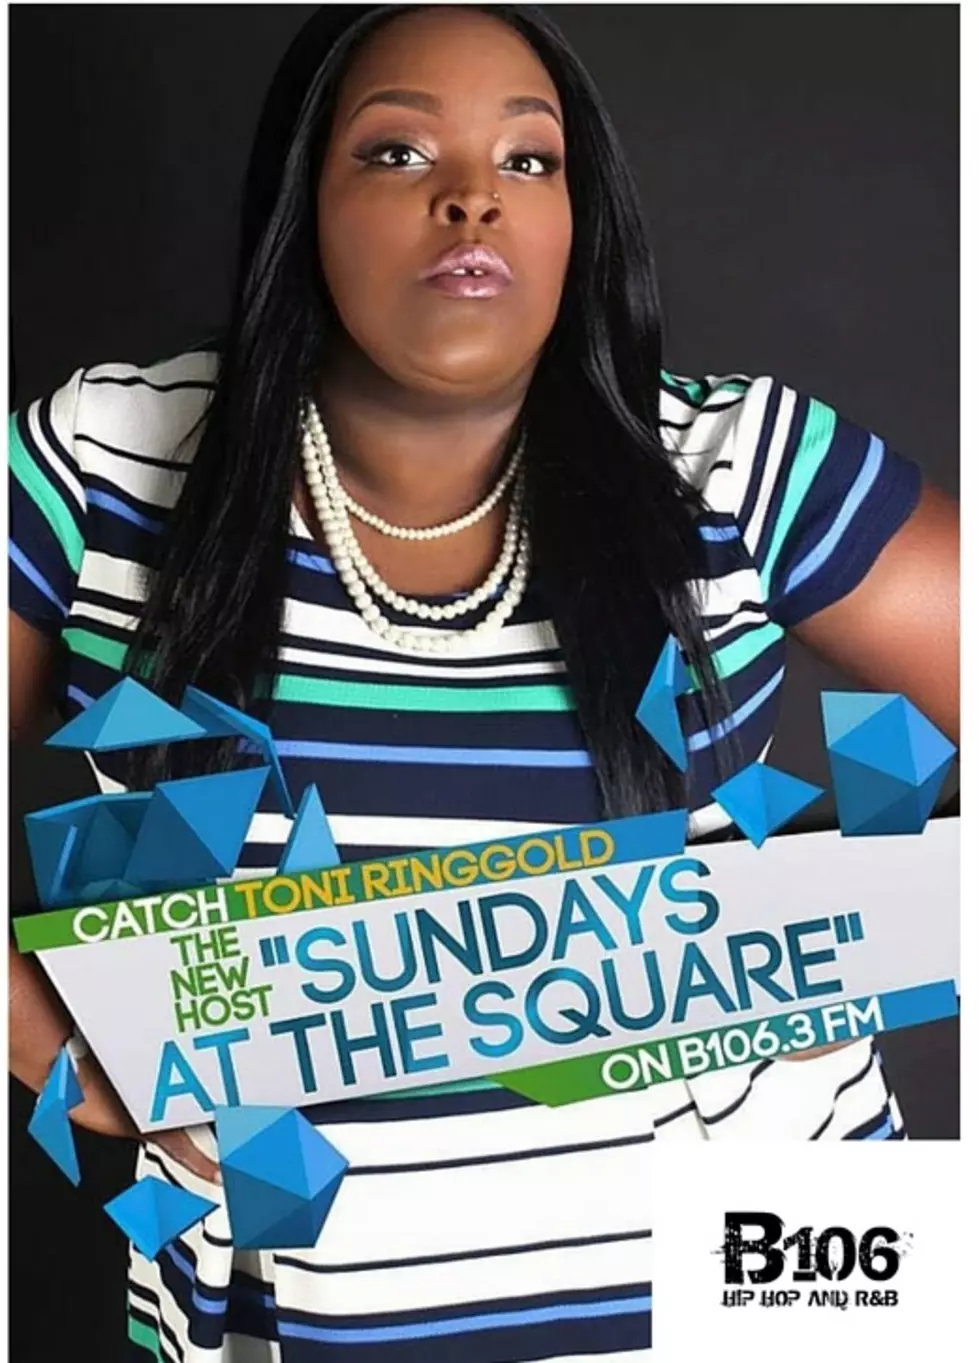 Sunday’s At The Square hosted by Toni Ringgold- Giving Back to the Community